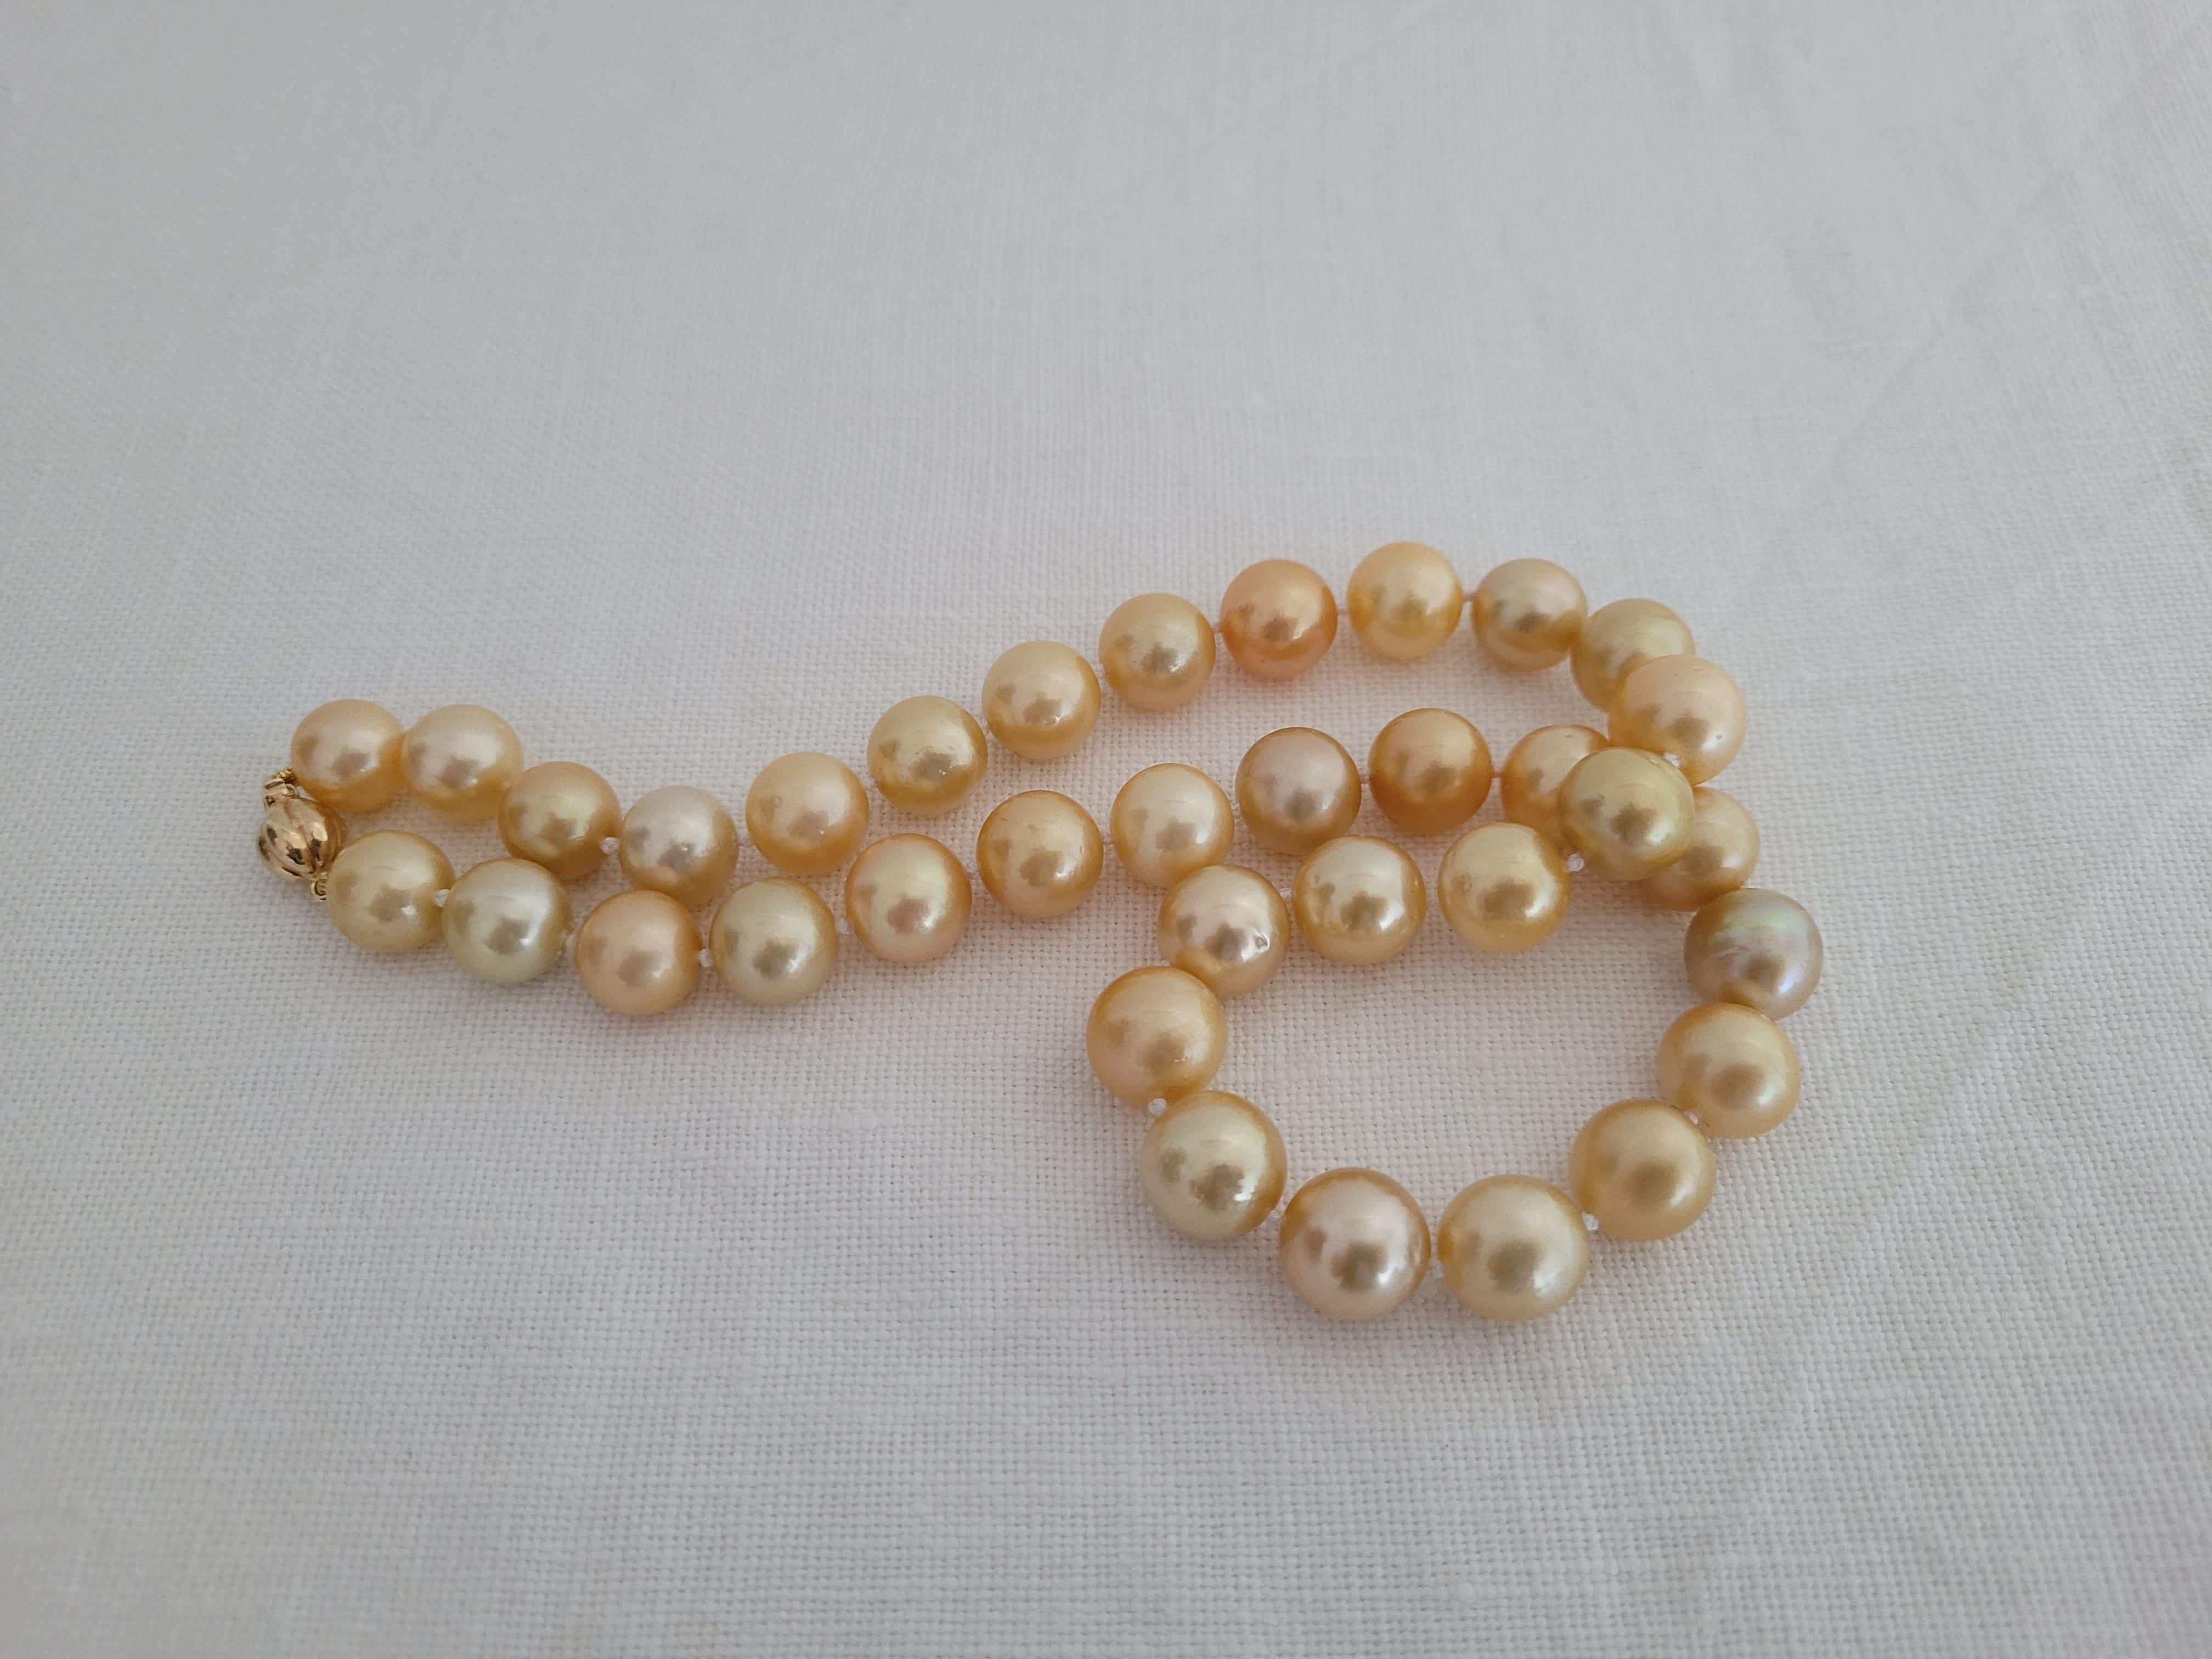 A Natural Color South Sea Pearls necklace

- Size of Pearls 11-12 mm of diameter.

- Pearls from Pinctada Maxima Oyster

- Origin: Indonesia ocean waters

- Natural Color Deep Golden 

- High Natural luster and orient

- Pearls of Round shape

-